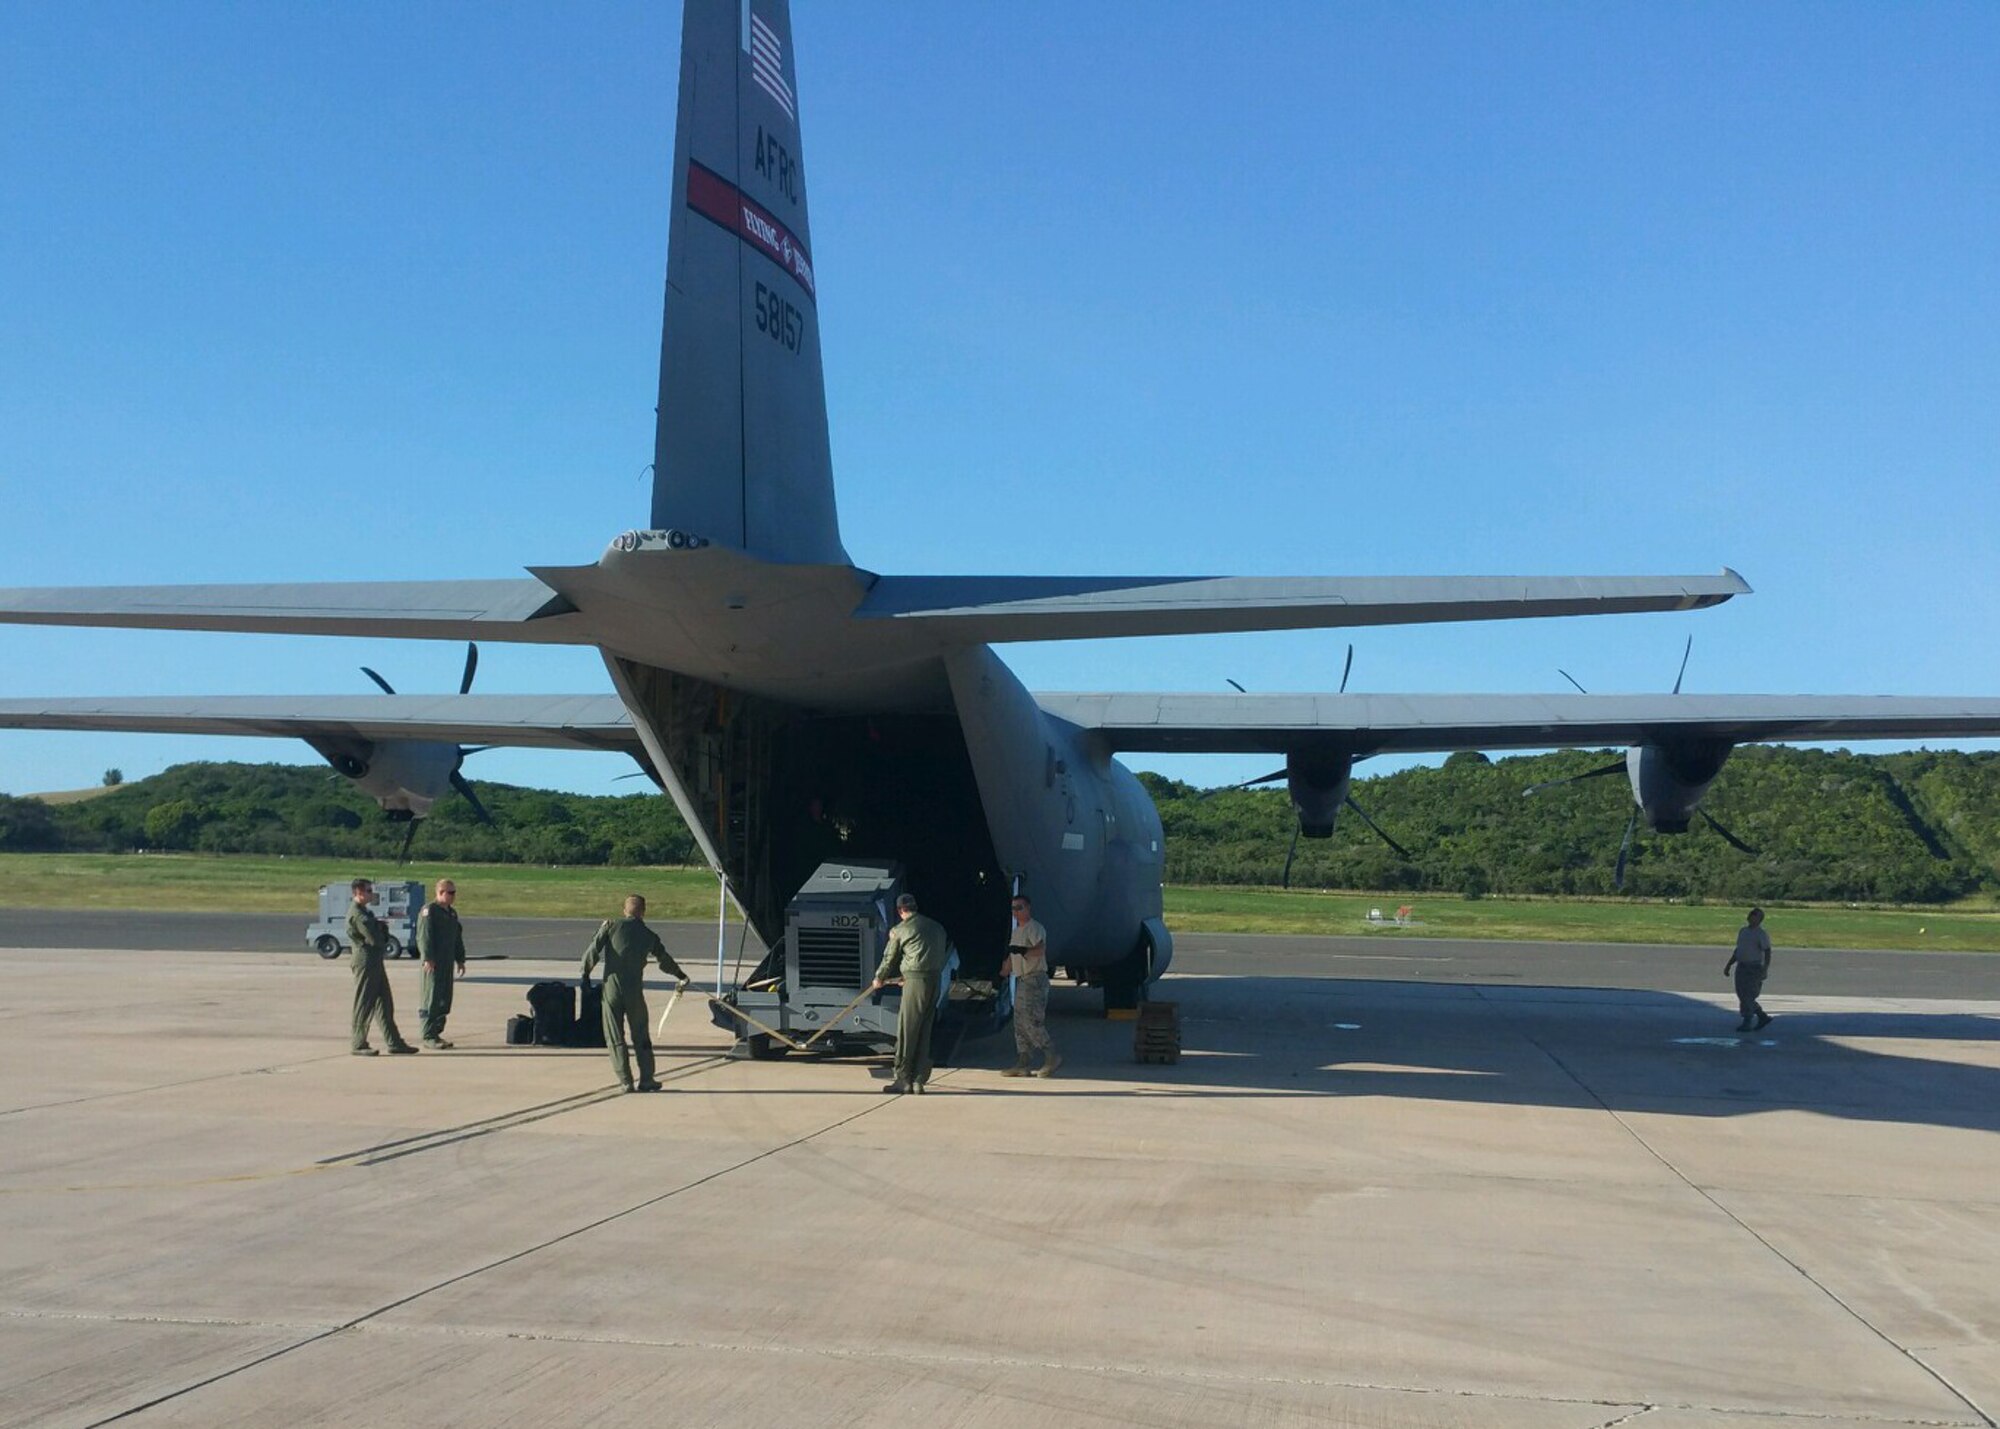 Air Force reservists with the 403rd Wing, based at Keesler Air Force Base, Mississippi, load an 815th Airlift Squadron C-130J with equipment as part of the “Roll Up” Jan. 10-17, 2016 at the Henry Rohlsen Airport in St. Croix, U.S. Virgin Islands. The airport is the forward operating base for the 53rd Weather Reconnaissance Squadron “Hurricane Hunters.” (U.S. Air Force photo/Master Sgt. Brian J. Lamar)
